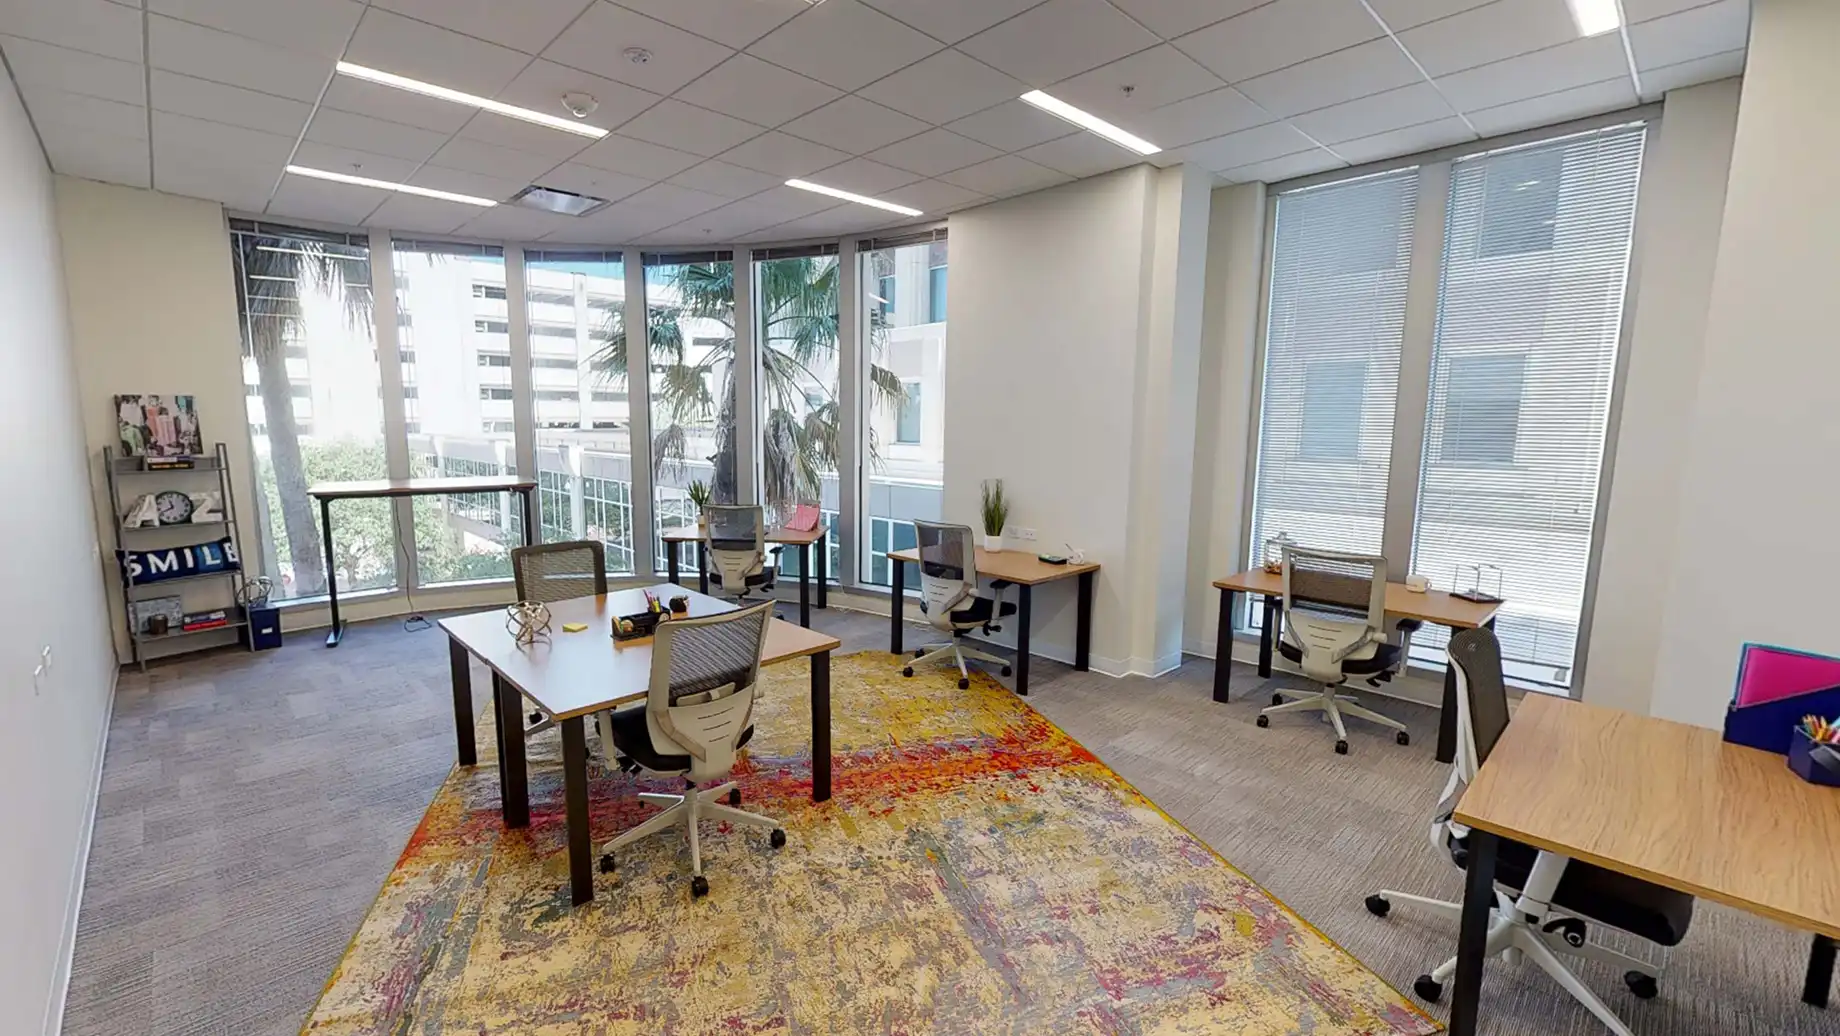 Downtown Orlando Private Office & Coworking Space, 6 person Team Room with private desks and open windows overlooking the city.